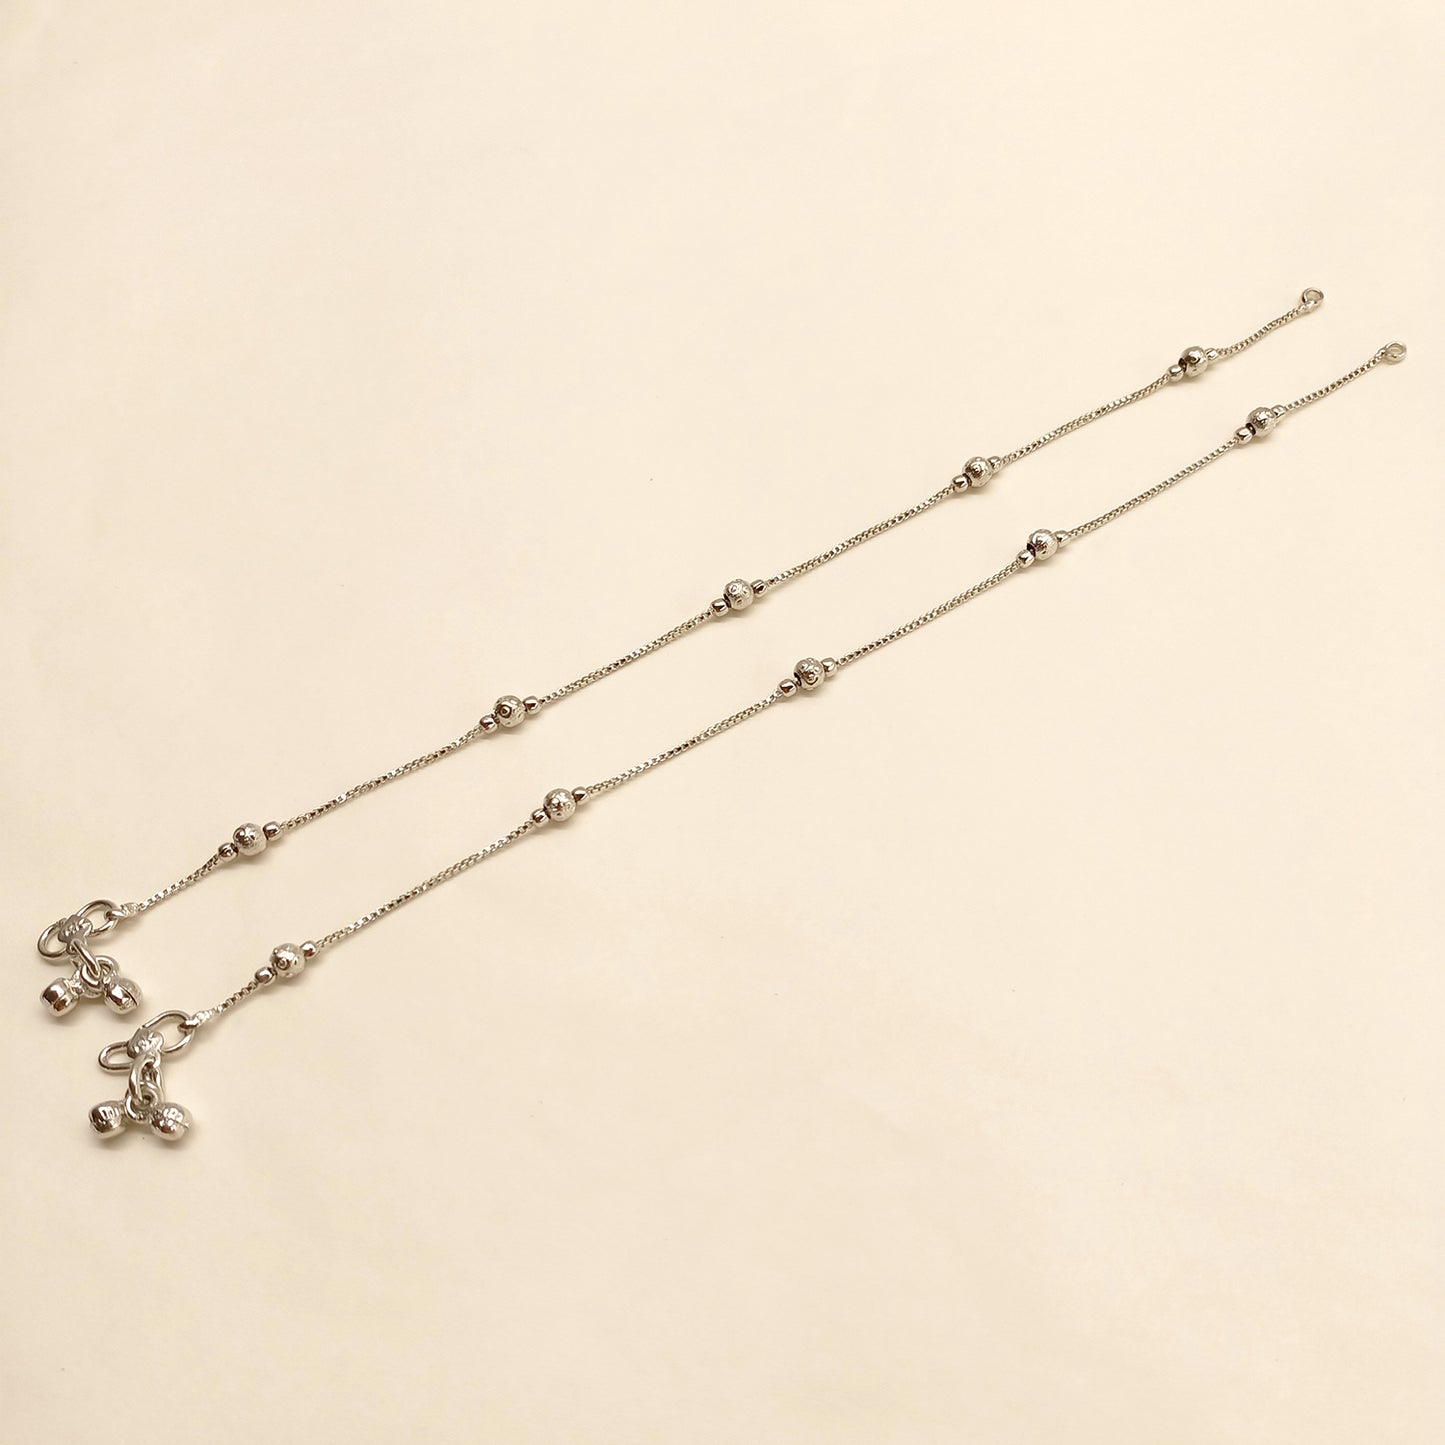 Urfi Silver Plated Delicate Payal/Anklet